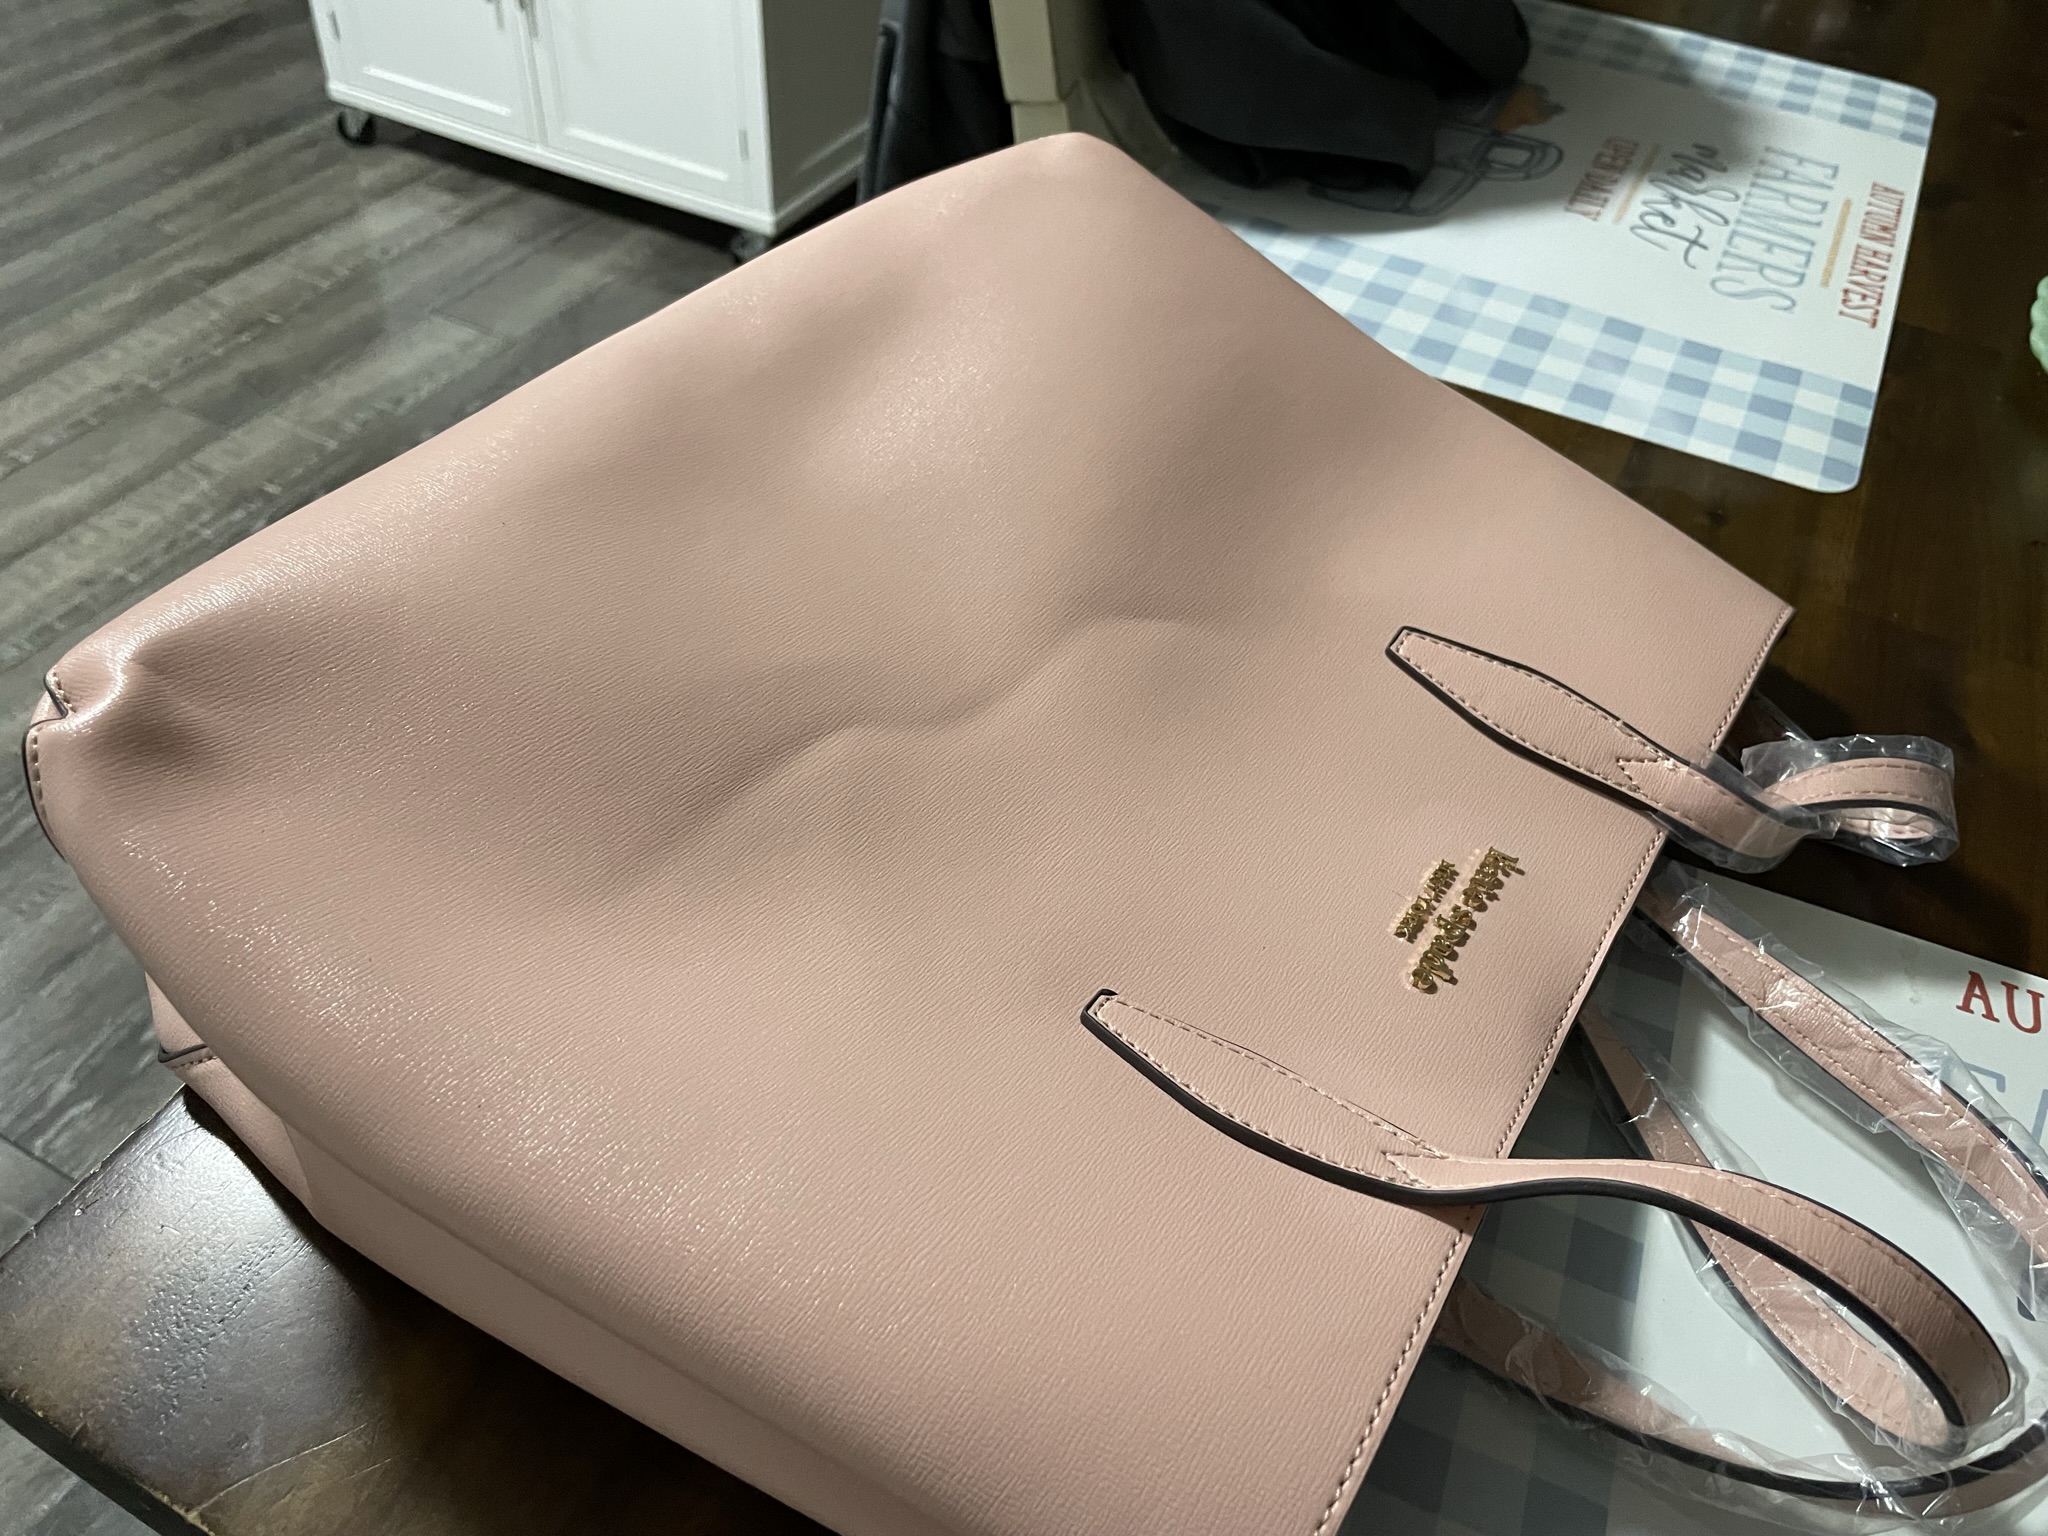 Let's Talk About Warranties For Bags